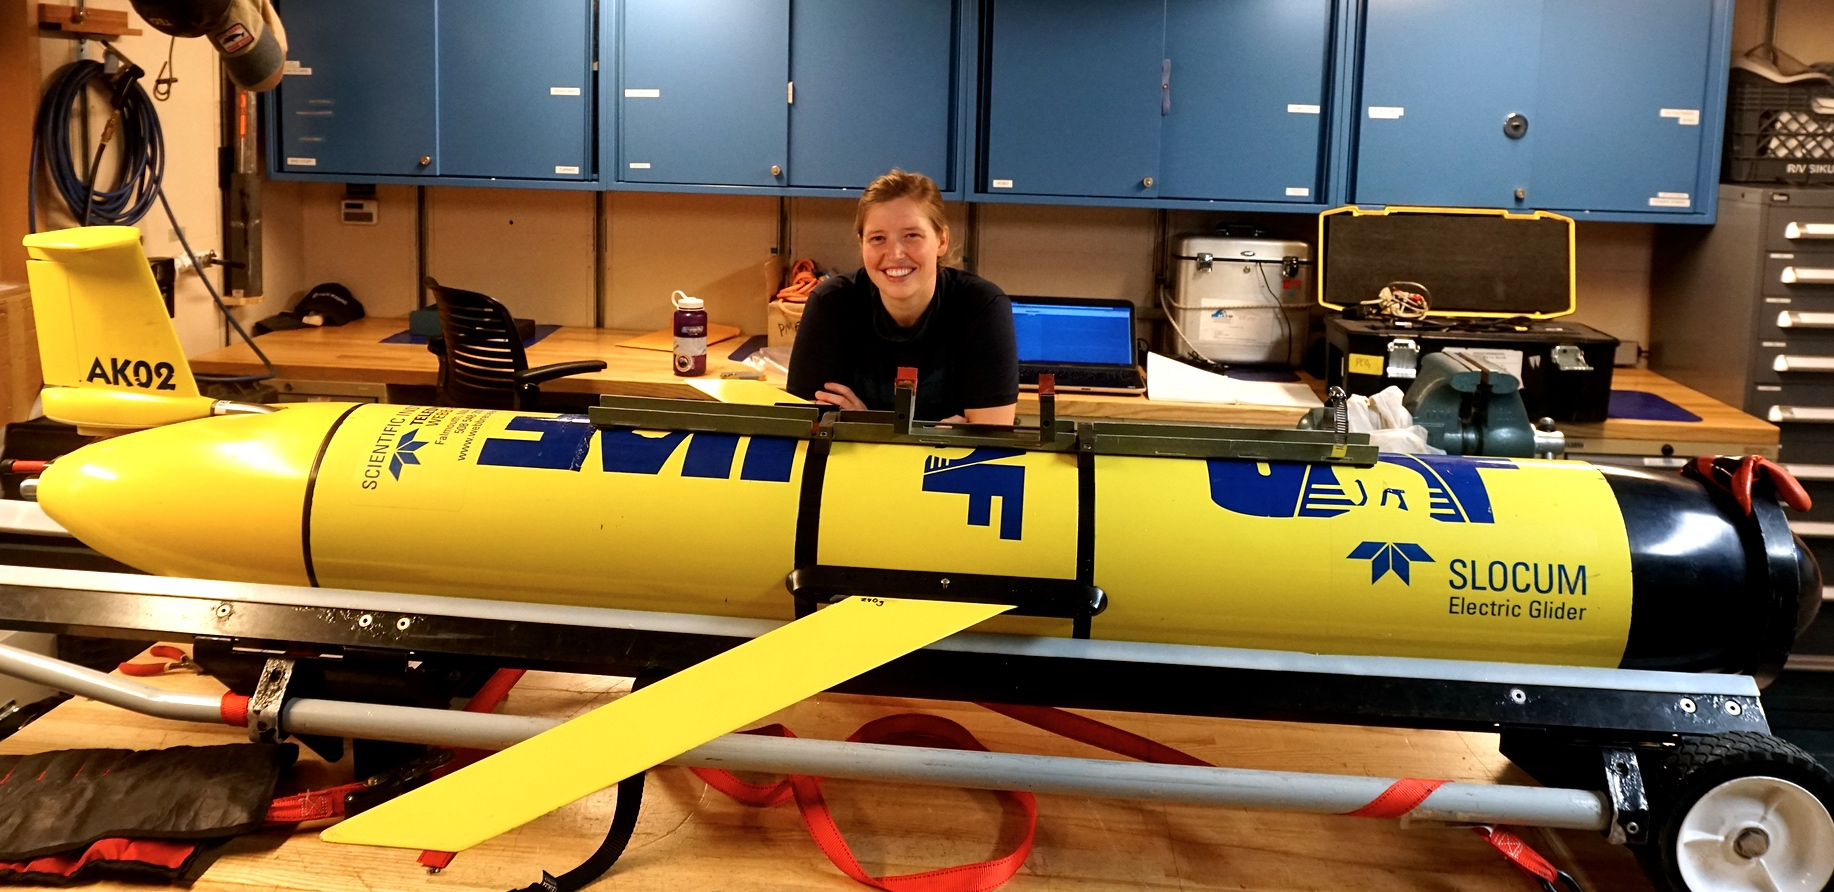 Brita Irving is a research scientist with the University of Alaska at Fairbanks. This is one of 6 underwater electric gliders that she oversees.